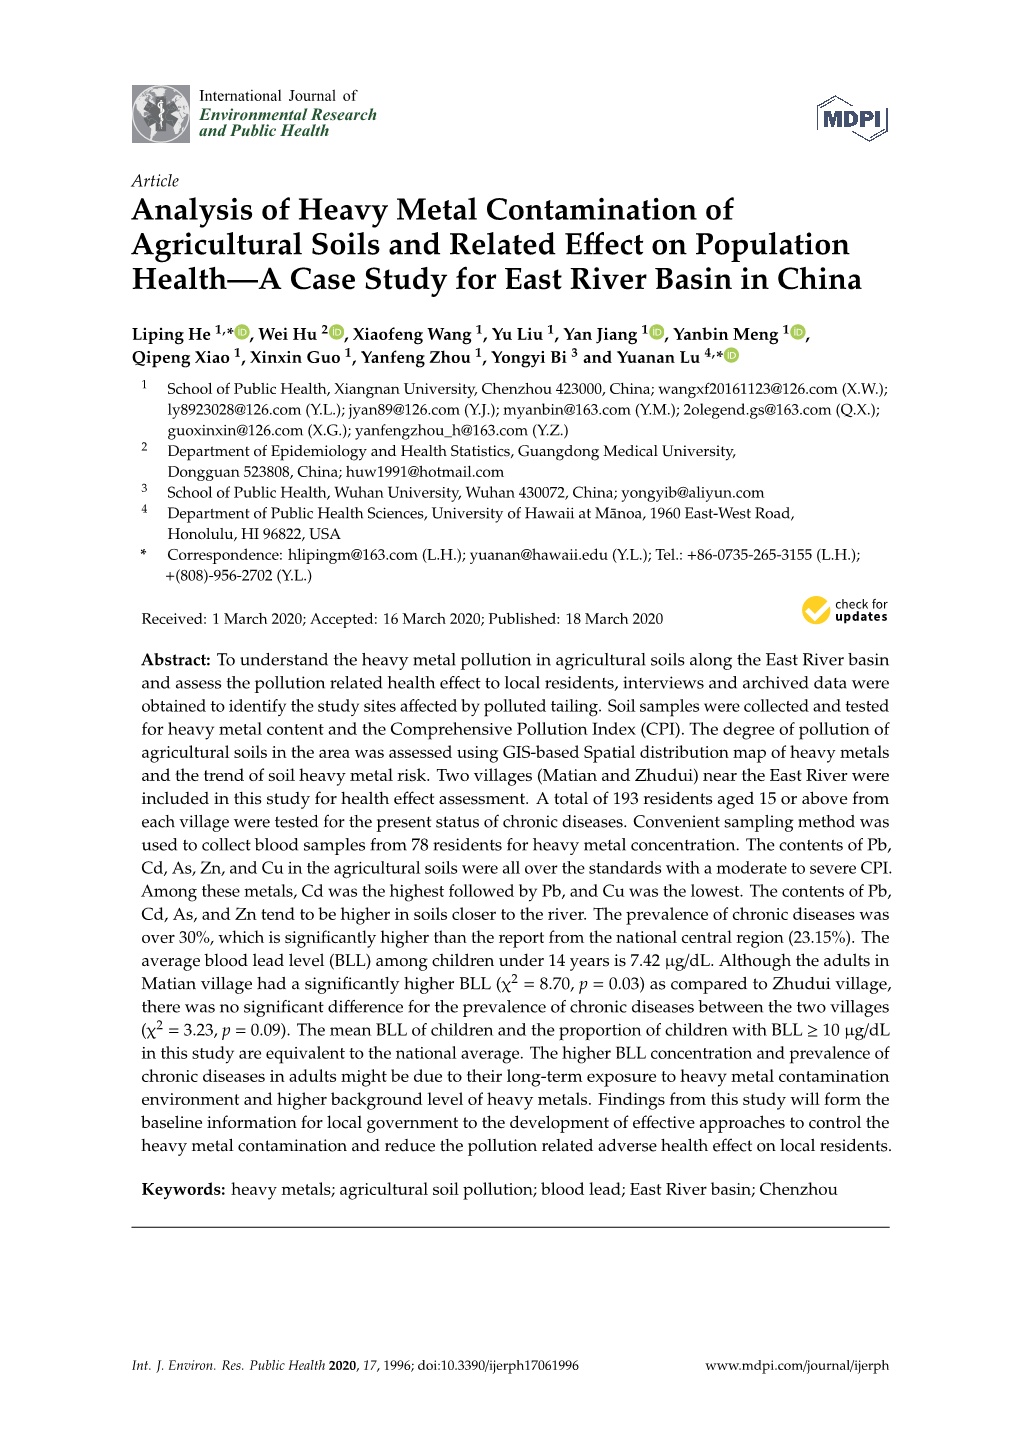 Analysis of Heavy Metal Contamination of Agricultural Soils and Related Eﬀect on Population Health—A Case Study for East River Basin in China